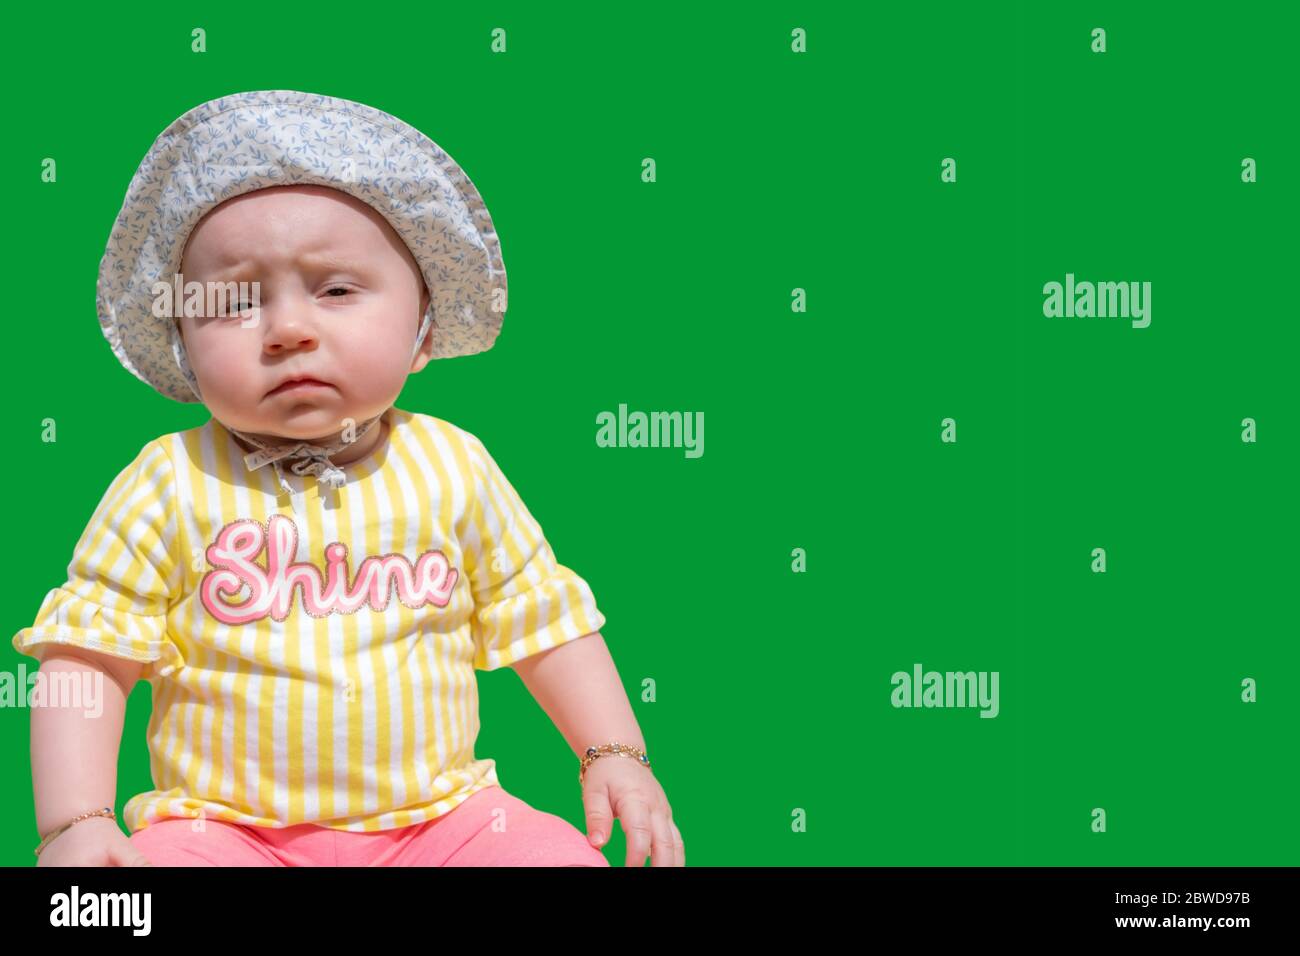 Cute baby girl wear adorable hat looking at camera make funny faces on green screen with text space Stock Photo